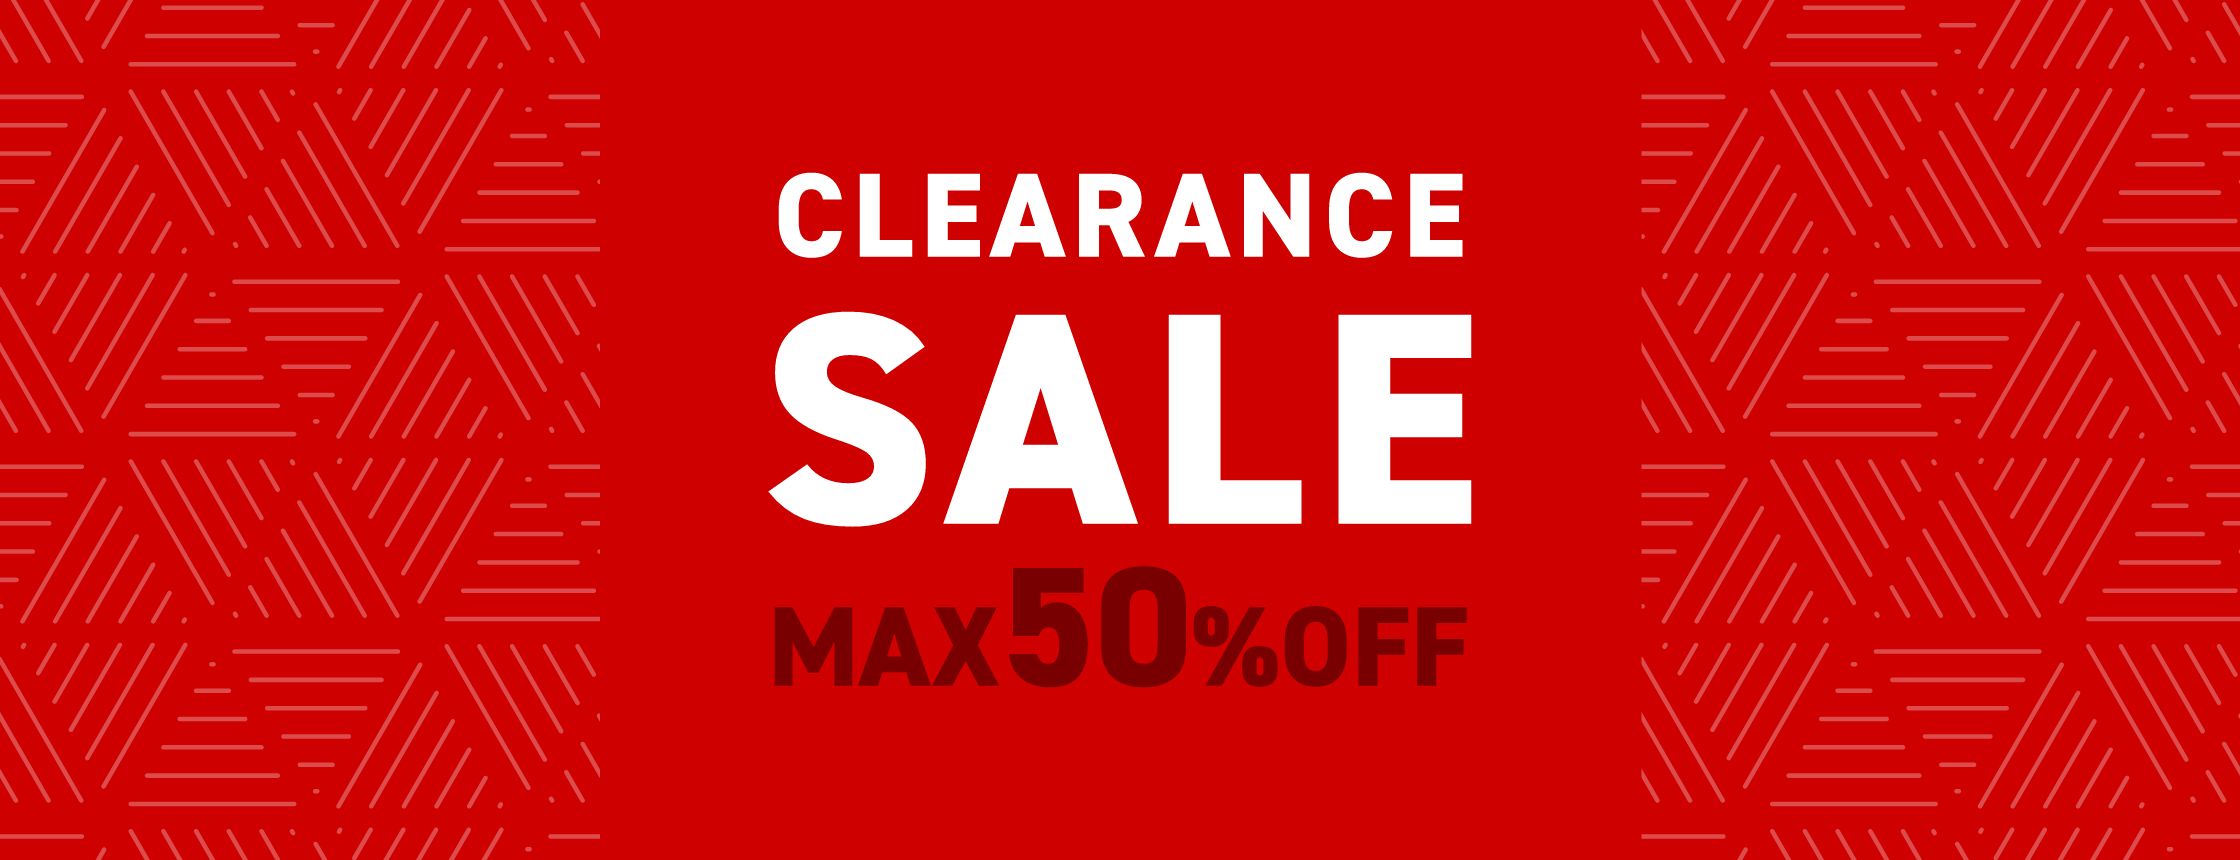 CLEARANCE SALE MAX50%OFF